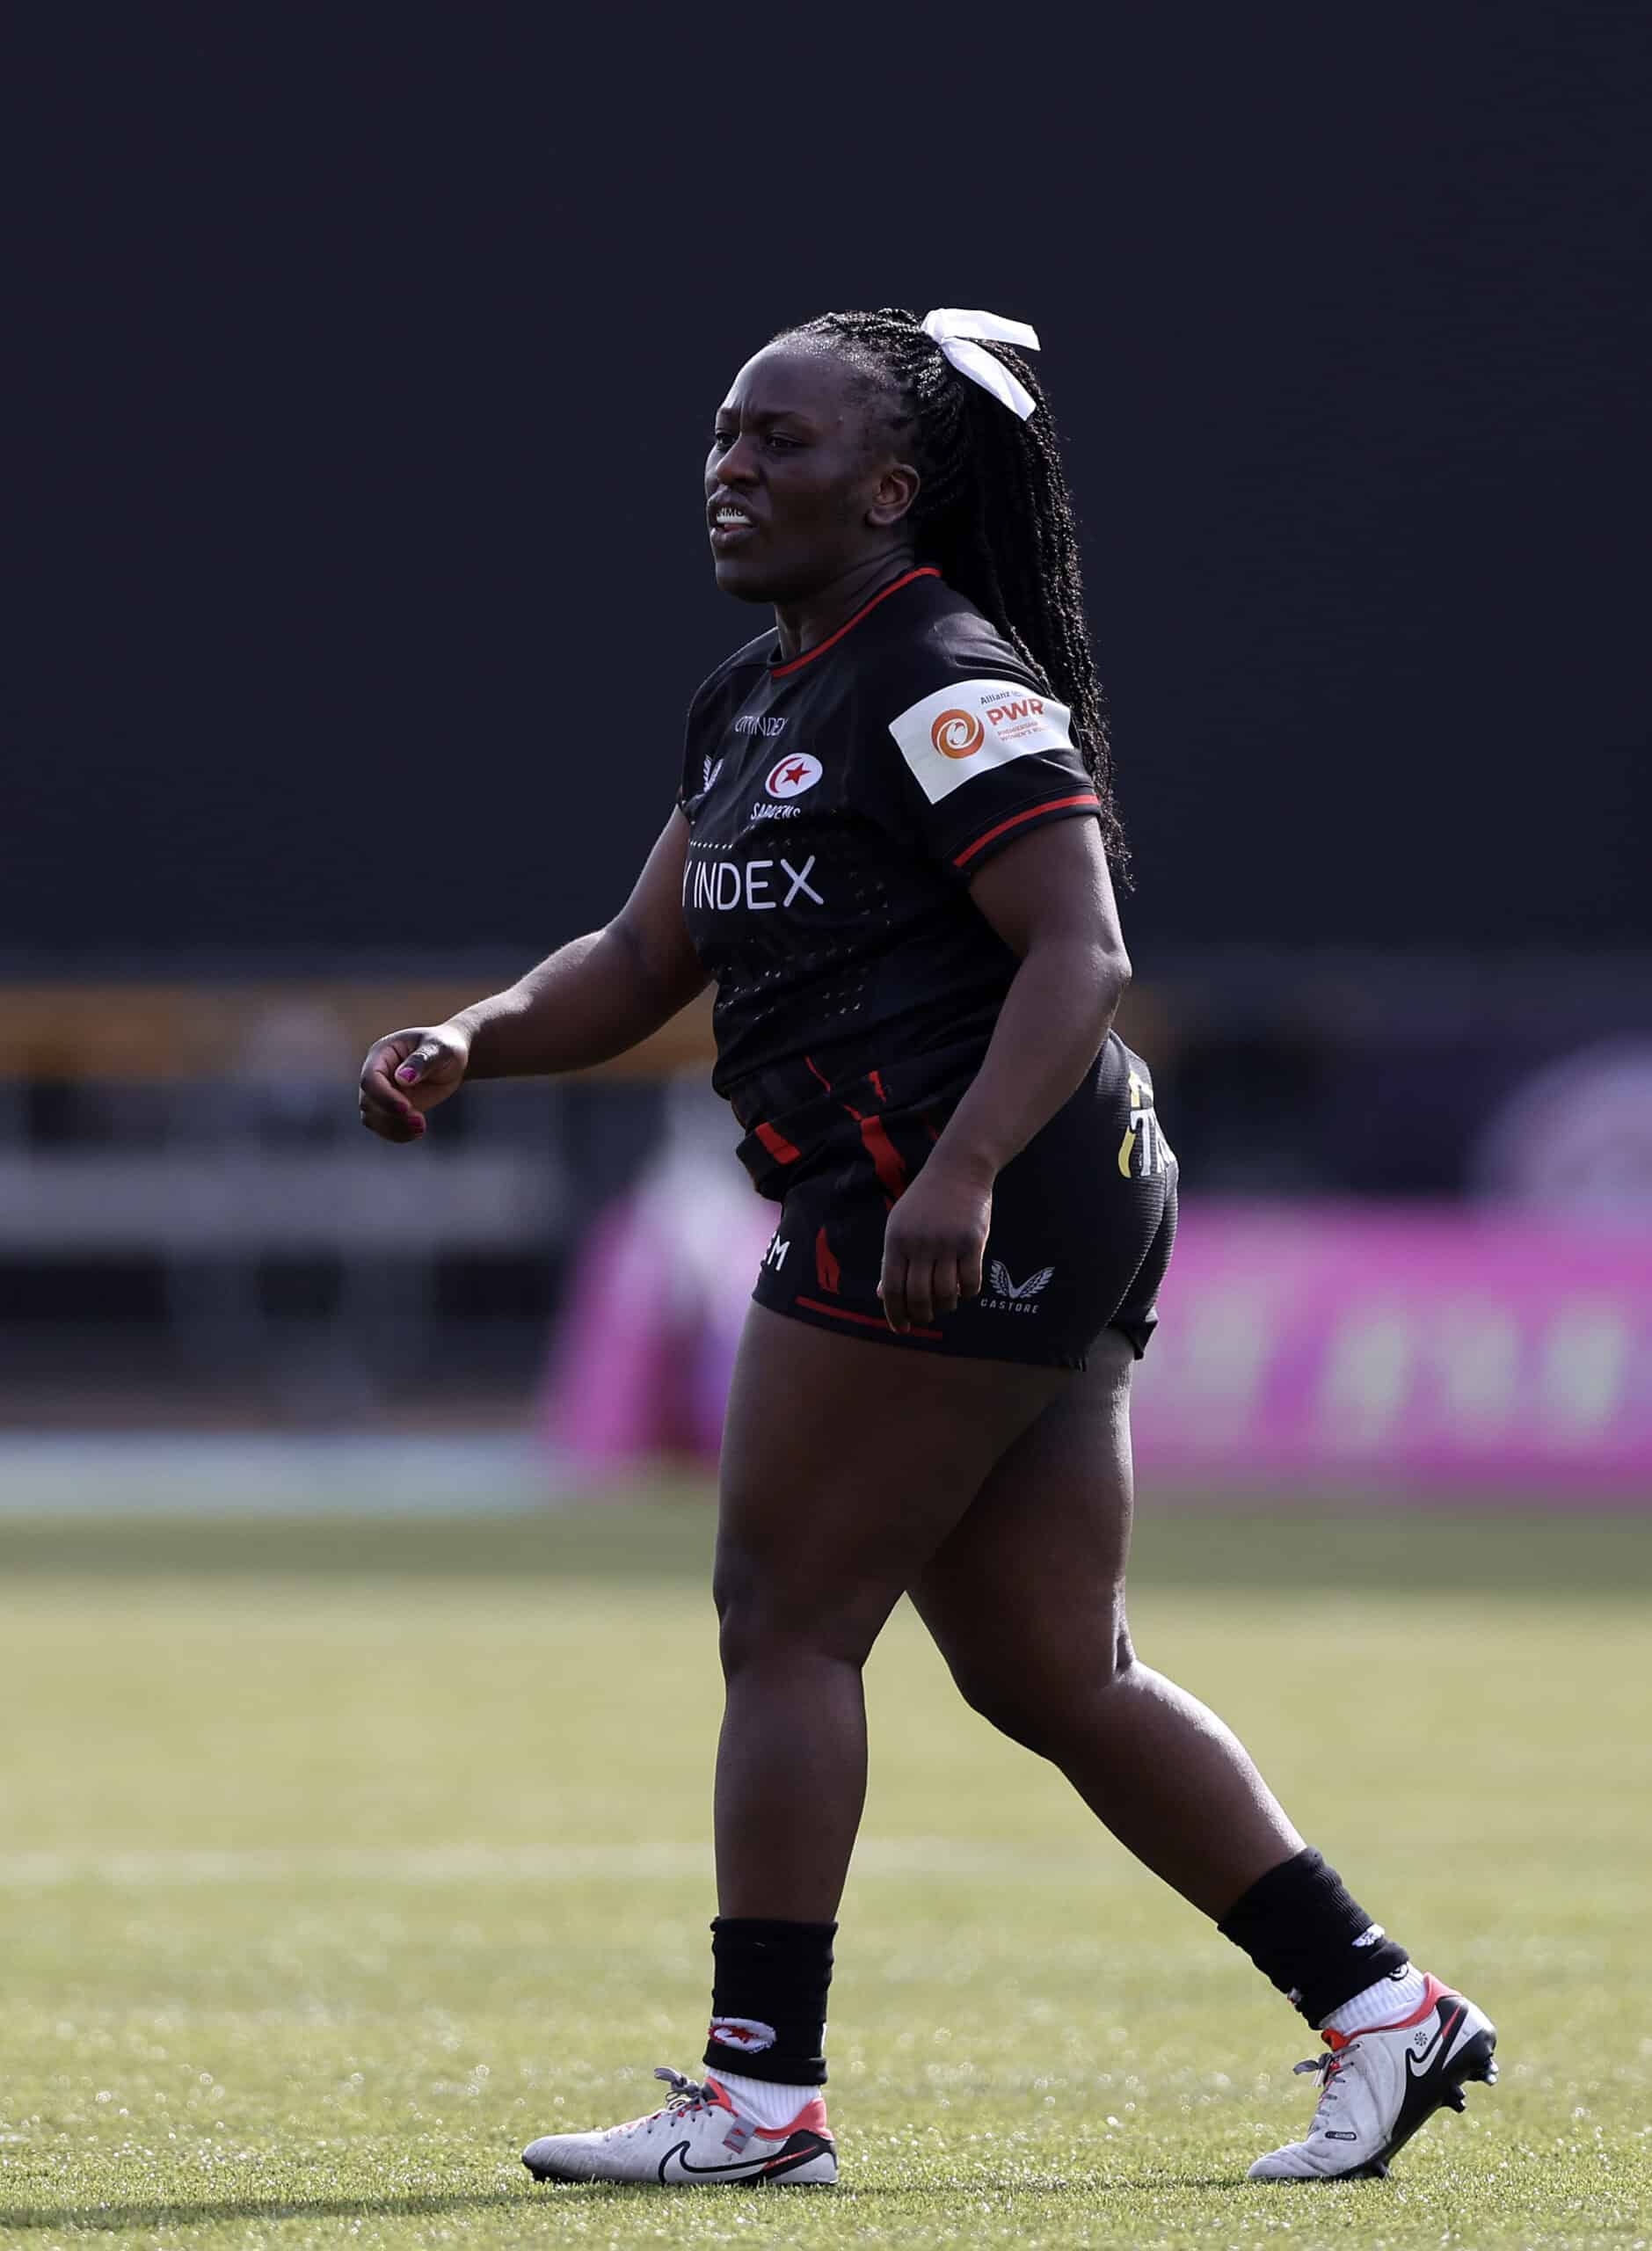 Saracens Women V Exeter Chiefs Women Allianz Cup Rugby Union